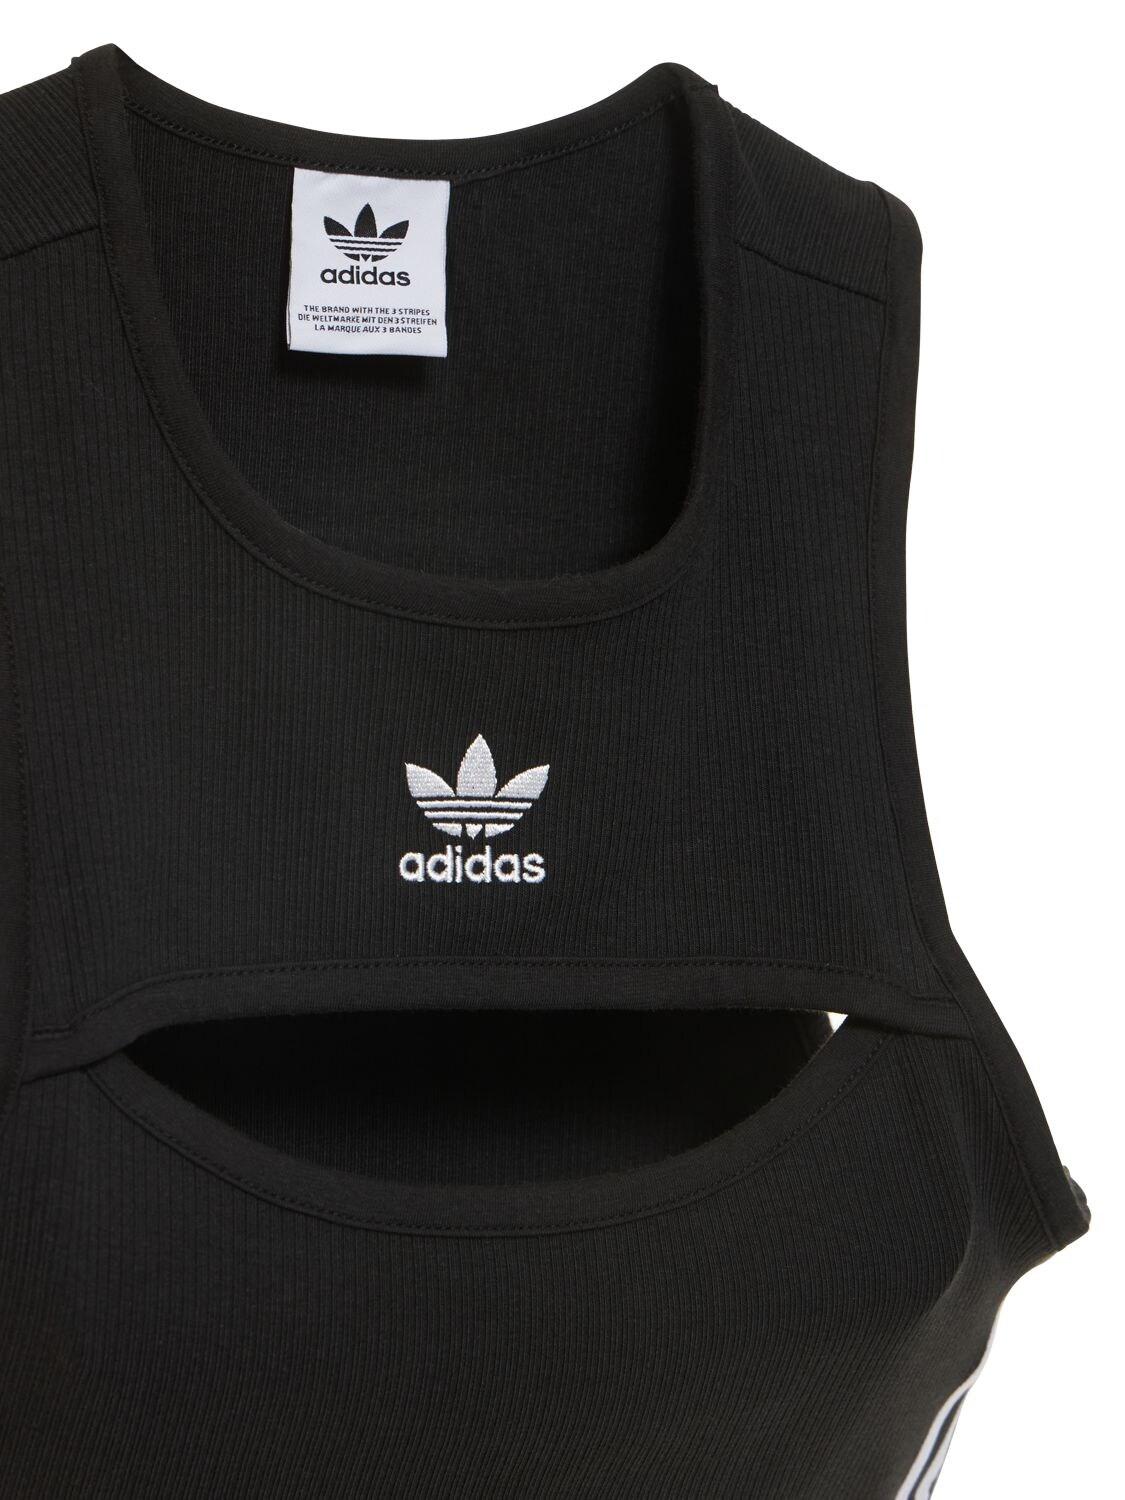 adidas Originals Fitted Cotton Blend Cropped Tank Top in Black | Lyst